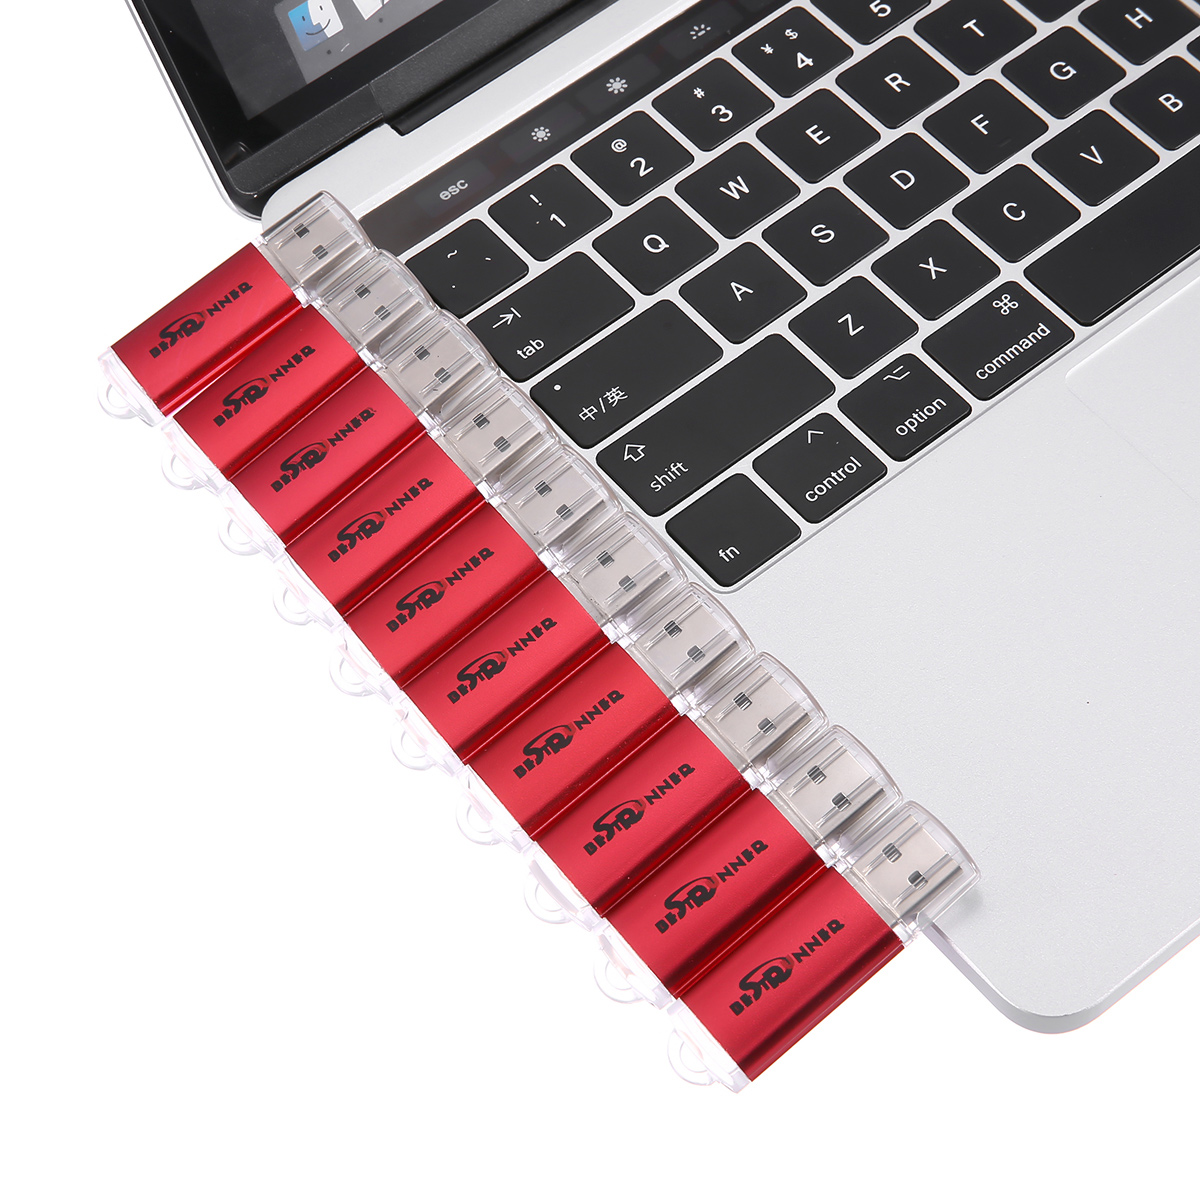 Find Bestrunner 10Pcs 128MB USB 2 0 Flash Drive Candy Red Color Memory Pen Storage Thumb U Disk for Sale on Gipsybee.com with cryptocurrencies